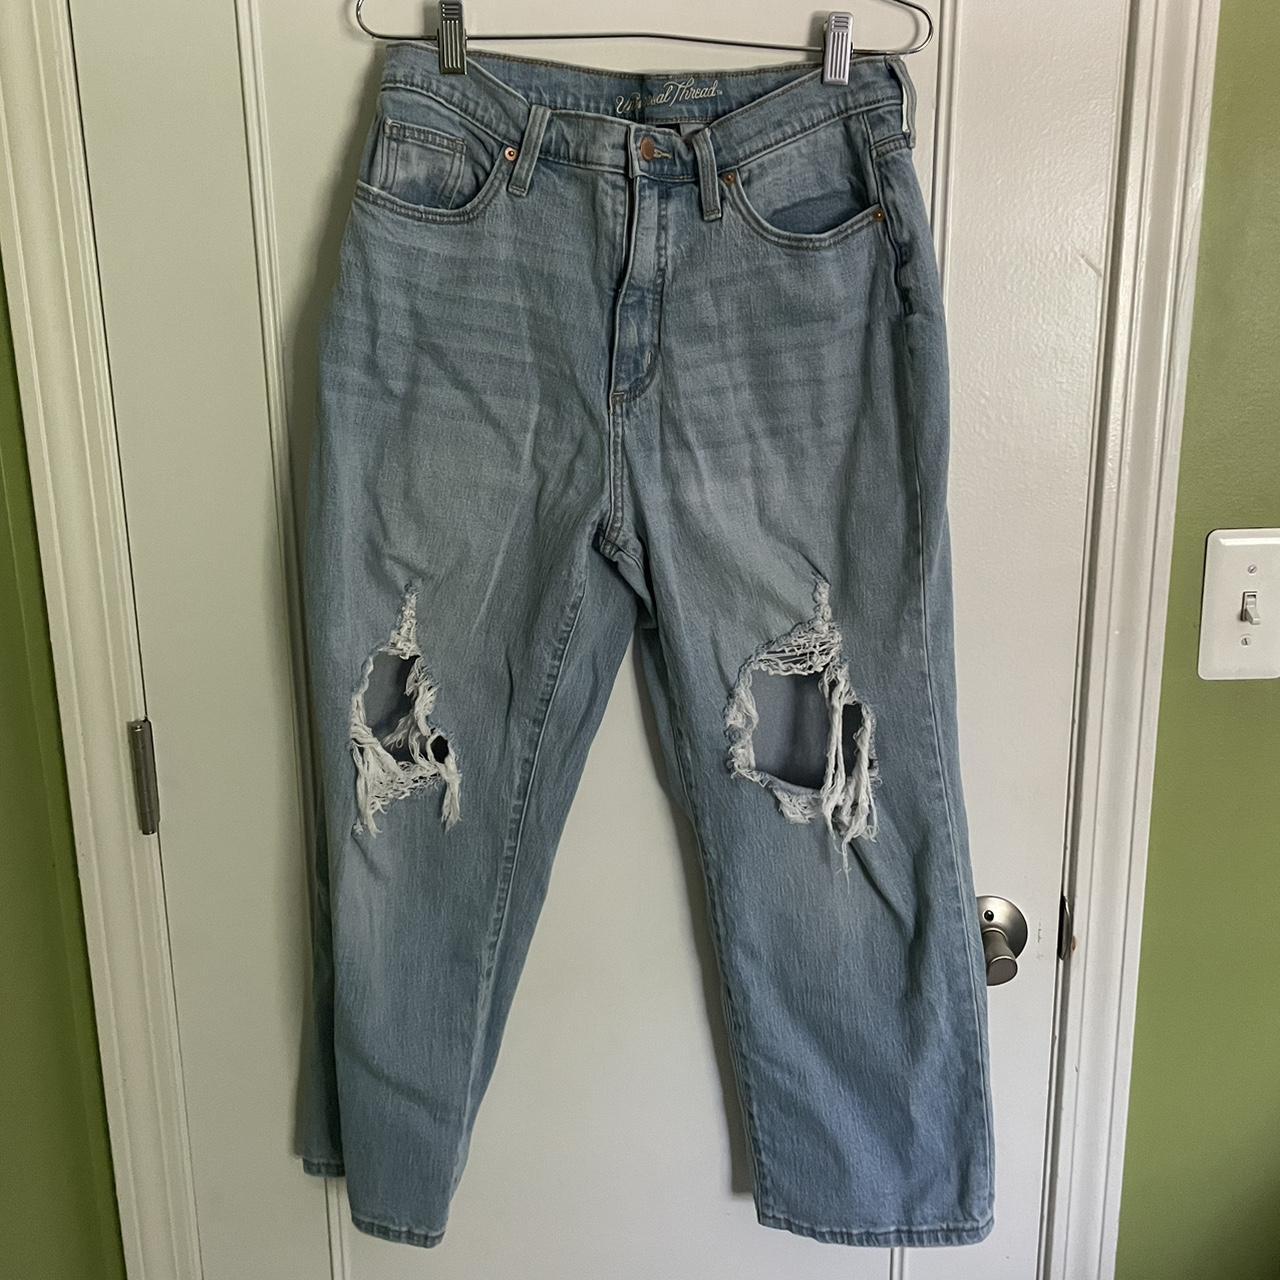 Target curvy mom jeans size 12! Great condition - Depop